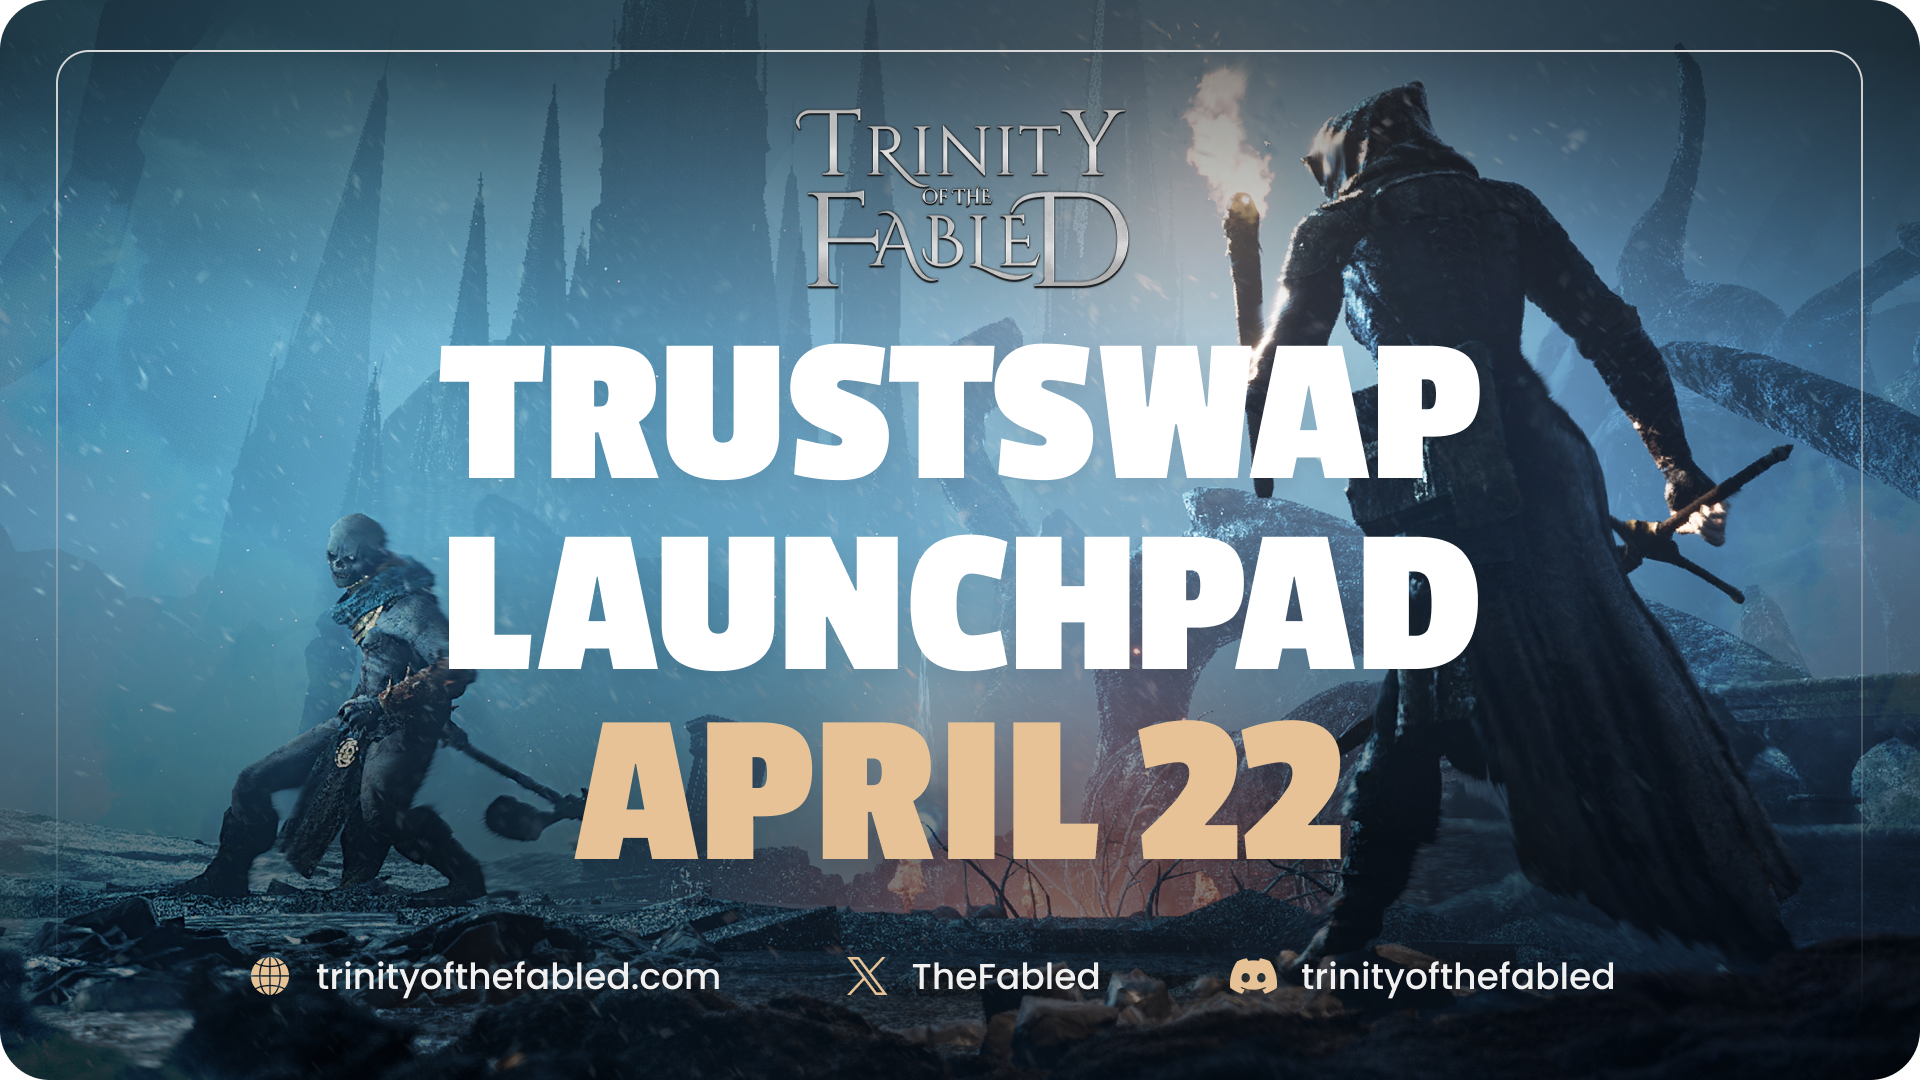 Trinity of The Fabled Announces April 22nd Token Offering on TrustSwap Launchpad